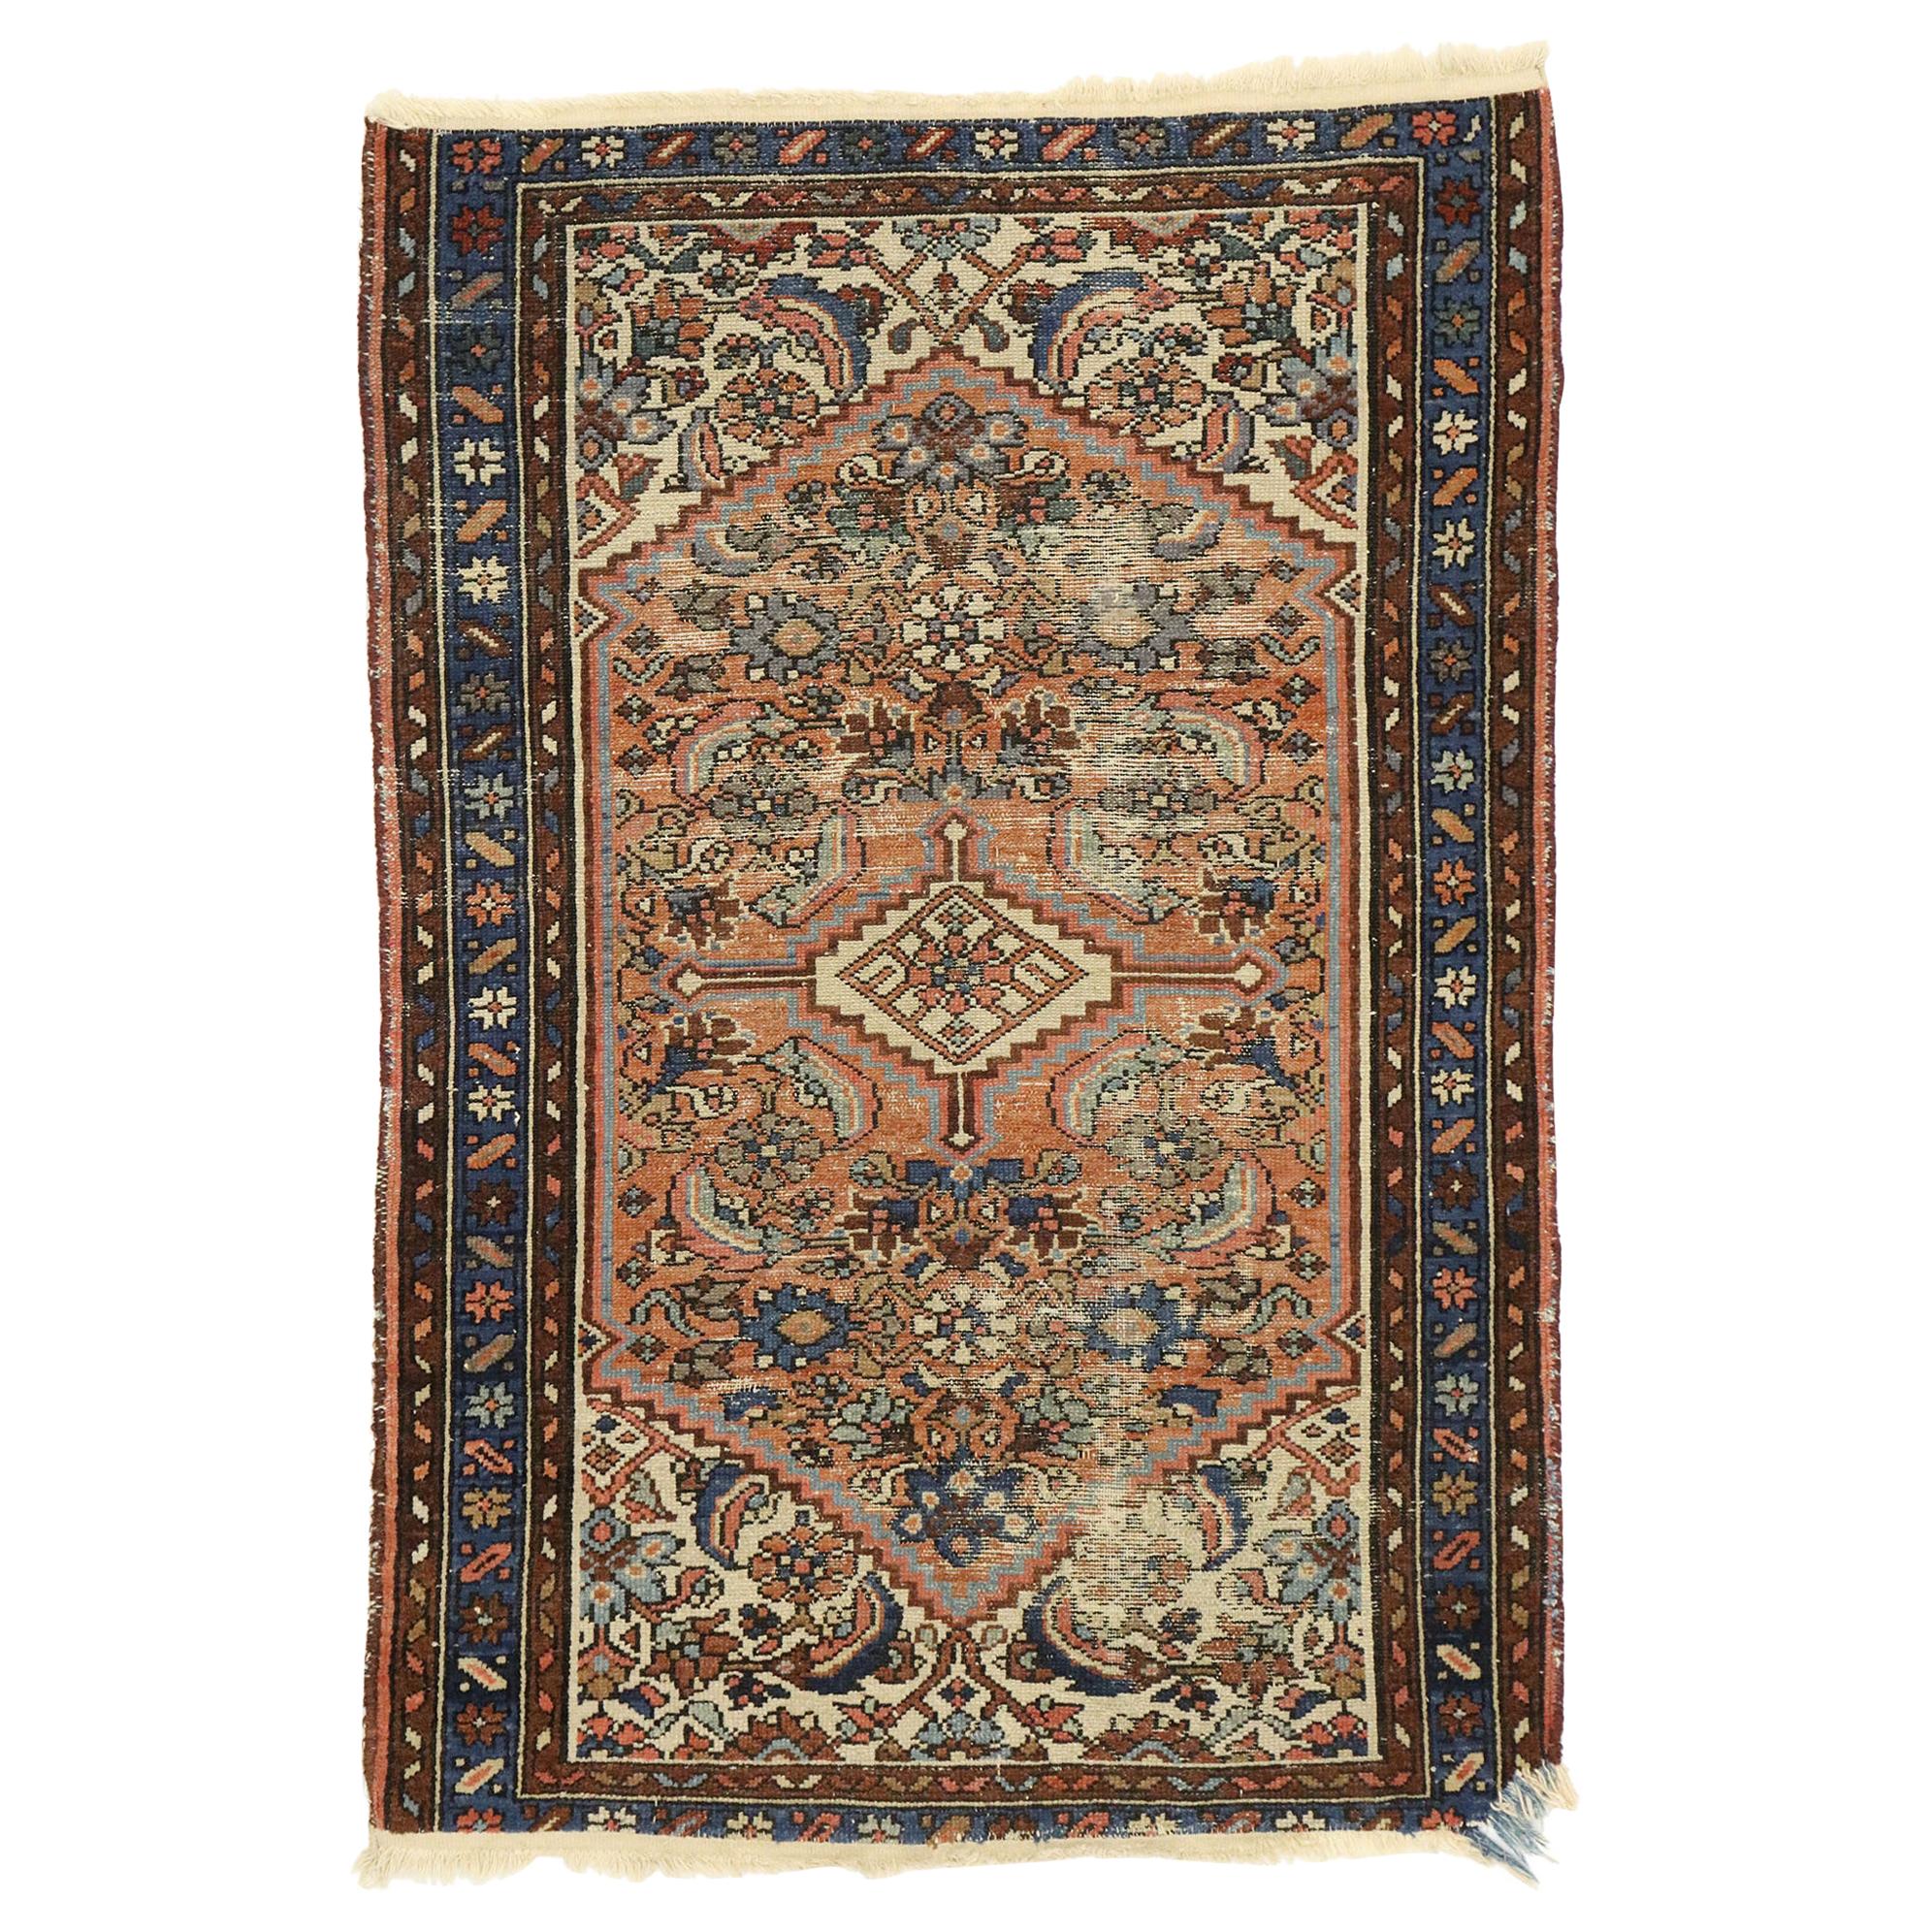 Distressed Antique Persian Hamadan Accent Rug with Romantic Industrial Style